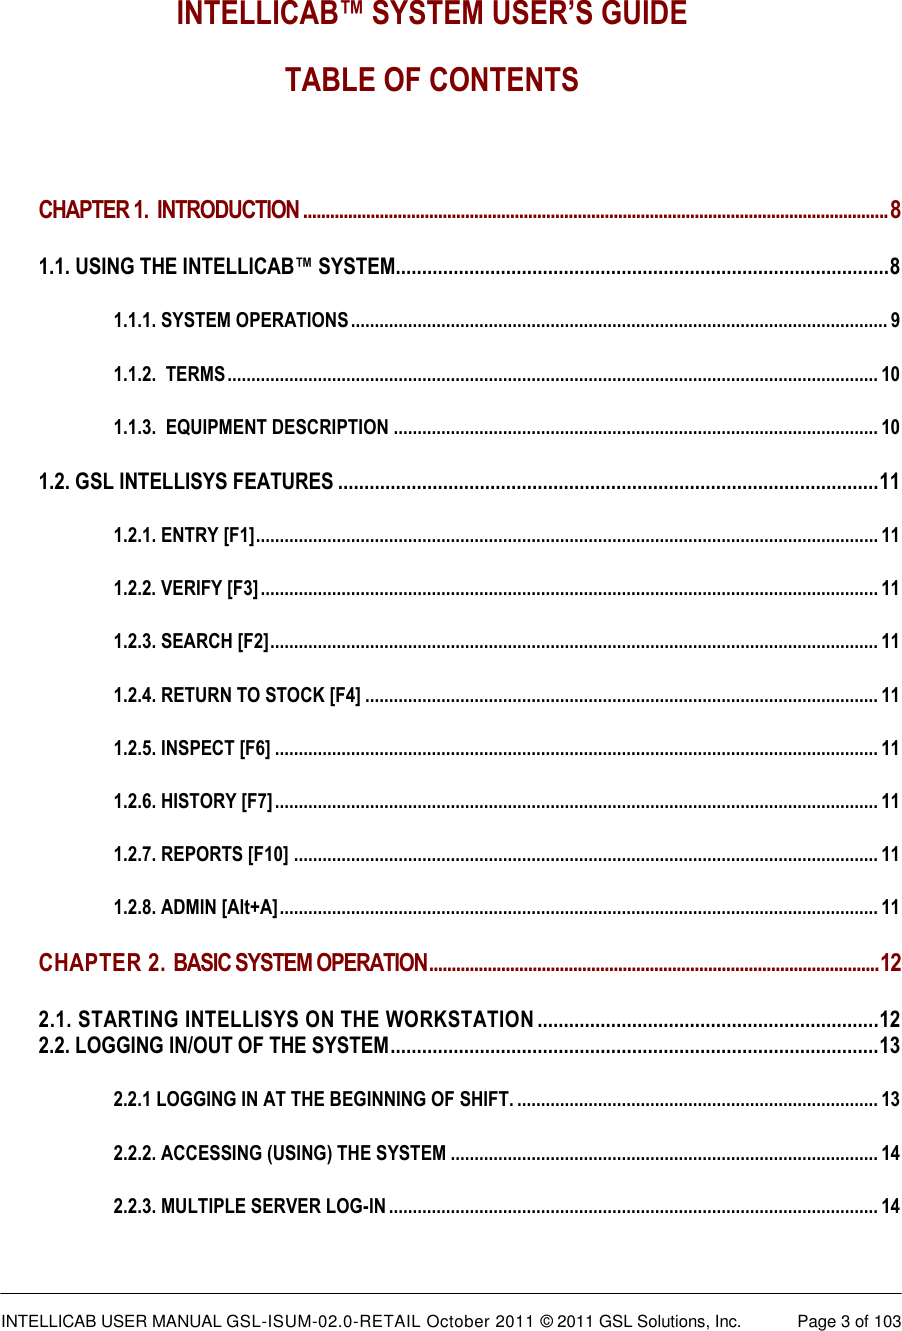  INTELLICAB USER MANUAL GSL-ISUM-02.0-RETAIL October 2011 © 2011 GSL Solutions, Inc.   Page 3 of 103    INTELLICAB™ SYSTEM USER’S GUIDE TABLE OF CONTENTS  CHAPTER 1.  INTRODUCTION .................................................................................................................................. 8 1.1. USING THE INTELLICAB™ SYSTEM.............................................................................................. 8 1.1.1. SYSTEM OPERATIONS ................................................................................................................. 9 1.1.2.  TERMS ......................................................................................................................................... 10 1.1.3.  EQUIPMENT DESCRIPTION ...................................................................................................... 10 1.2. GSL INTELLISYS FEATURES ....................................................................................................... 11 1.2.1. ENTRY [F1] ................................................................................................................................... 11 1.2.2. VERIFY [F3] .................................................................................................................................. 11 1.2.3. SEARCH [F2] ................................................................................................................................ 11 1.2.4. RETURN TO STOCK [F4] ............................................................................................................ 11 1.2.5. INSPECT [F6] ............................................................................................................................... 11 1.2.6. HISTORY [F7] ............................................................................................................................... 11 1.2.7. REPORTS [F10] ........................................................................................................................... 11 1.2.8. ADMIN [Alt+A] .............................................................................................................................. 11 CHAPTER 2. BASIC SYSTEM OPERATION .................................................................................................... 12 2.1. STARTING INTELLISYS ON THE WORKSTATION ................................................................. 12 2.2. LOGGING IN/OUT OF THE SYSTEM ............................................................................................. 13 2.2.1 LOGGING IN AT THE BEGINNING OF SHIFT. ............................................................................ 13 2.2.2. ACCESSING (USING) THE SYSTEM .......................................................................................... 14 2.2.3. MULTIPLE SERVER LOG-IN ....................................................................................................... 14 